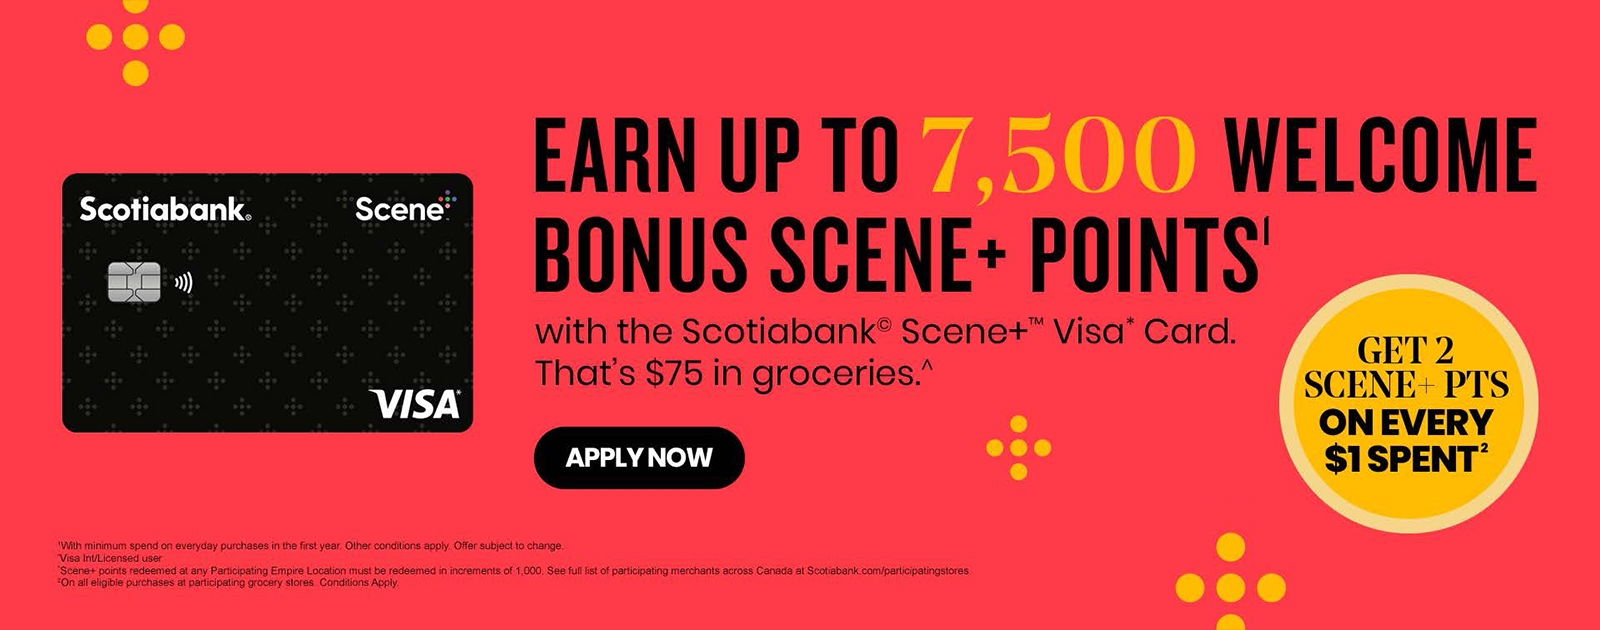 The following image consists of the text, "Earn up to 7,500 welcome bonus scene+ points with the Scotiabank Scene+ Visa Card. That's $75 in grocries. Get 2 Scene+ PTS on every $1 spent."